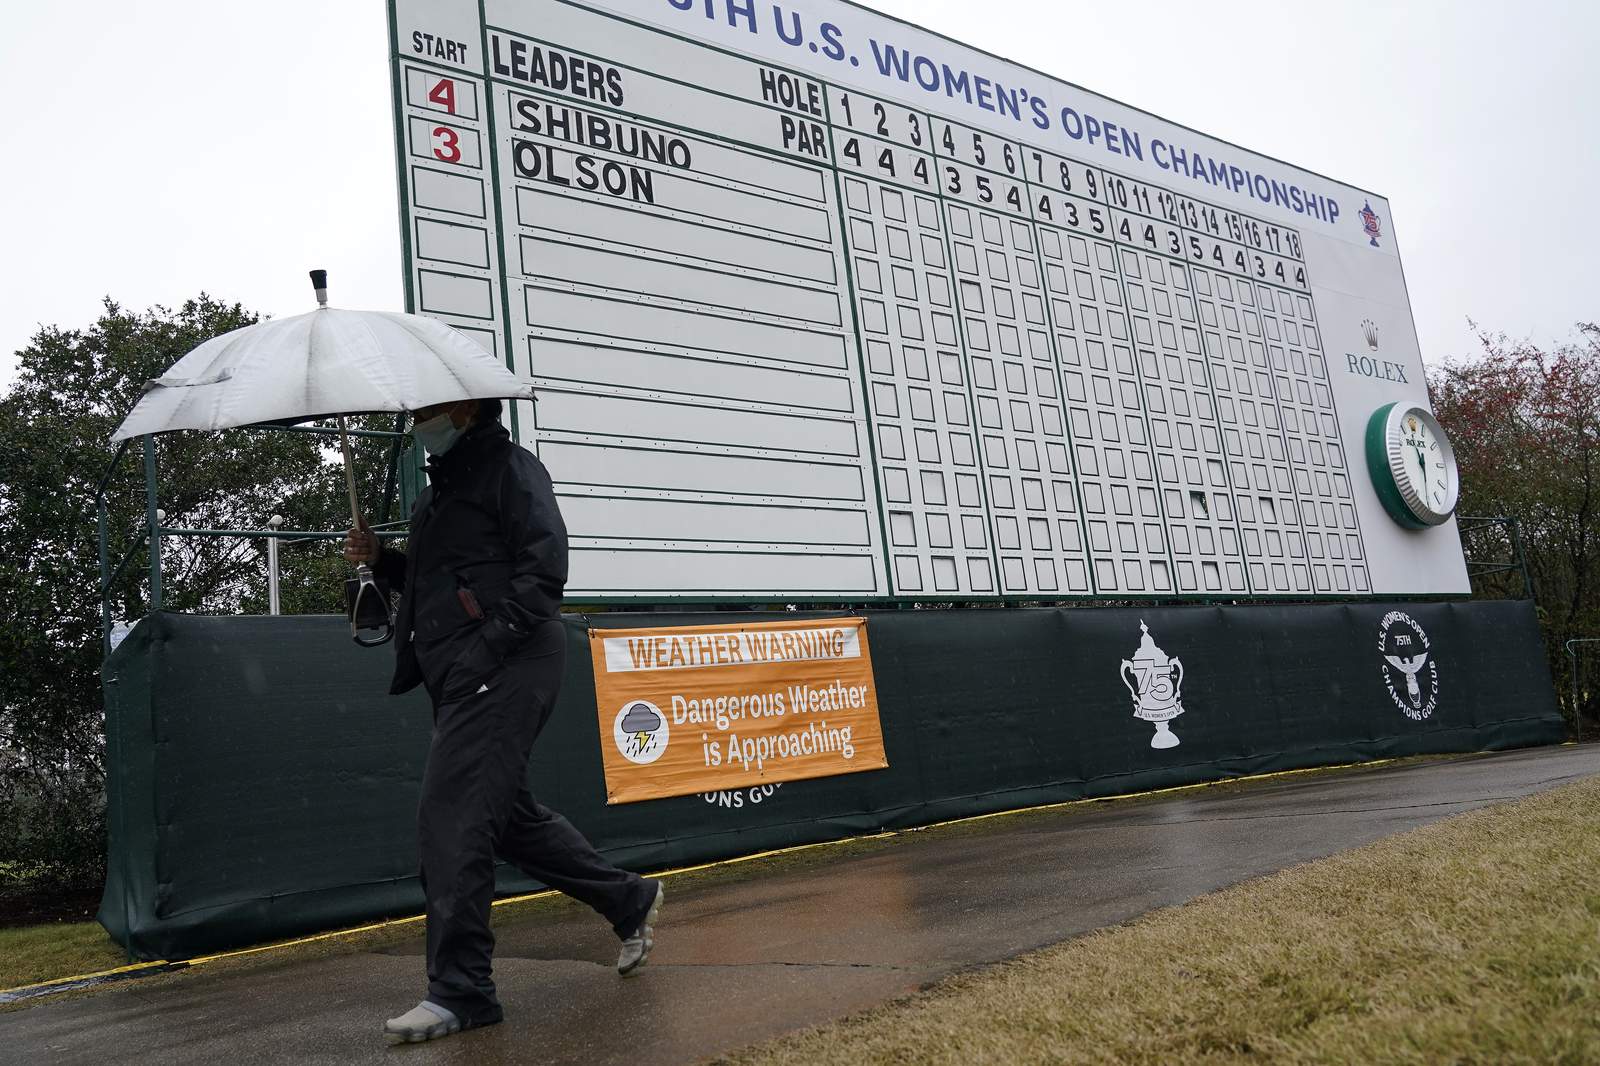 US Women’s Open in Houston pushed to Monday because of thunderstorms